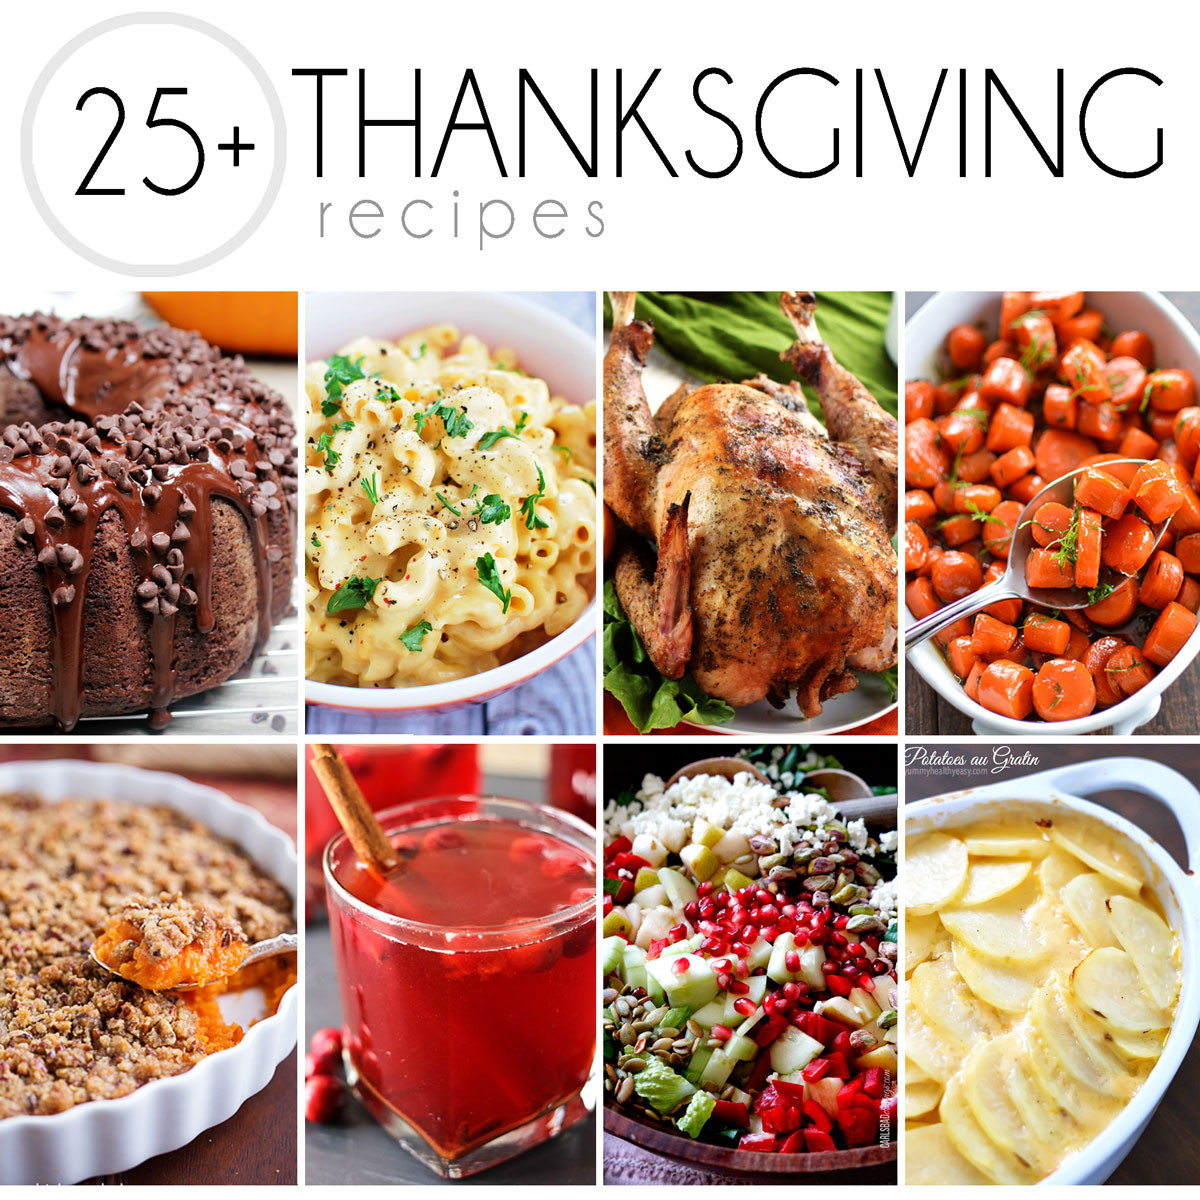 30 Best Turkey Recipes for Thanksgiving Dinner – Best Diet and Healthy ...